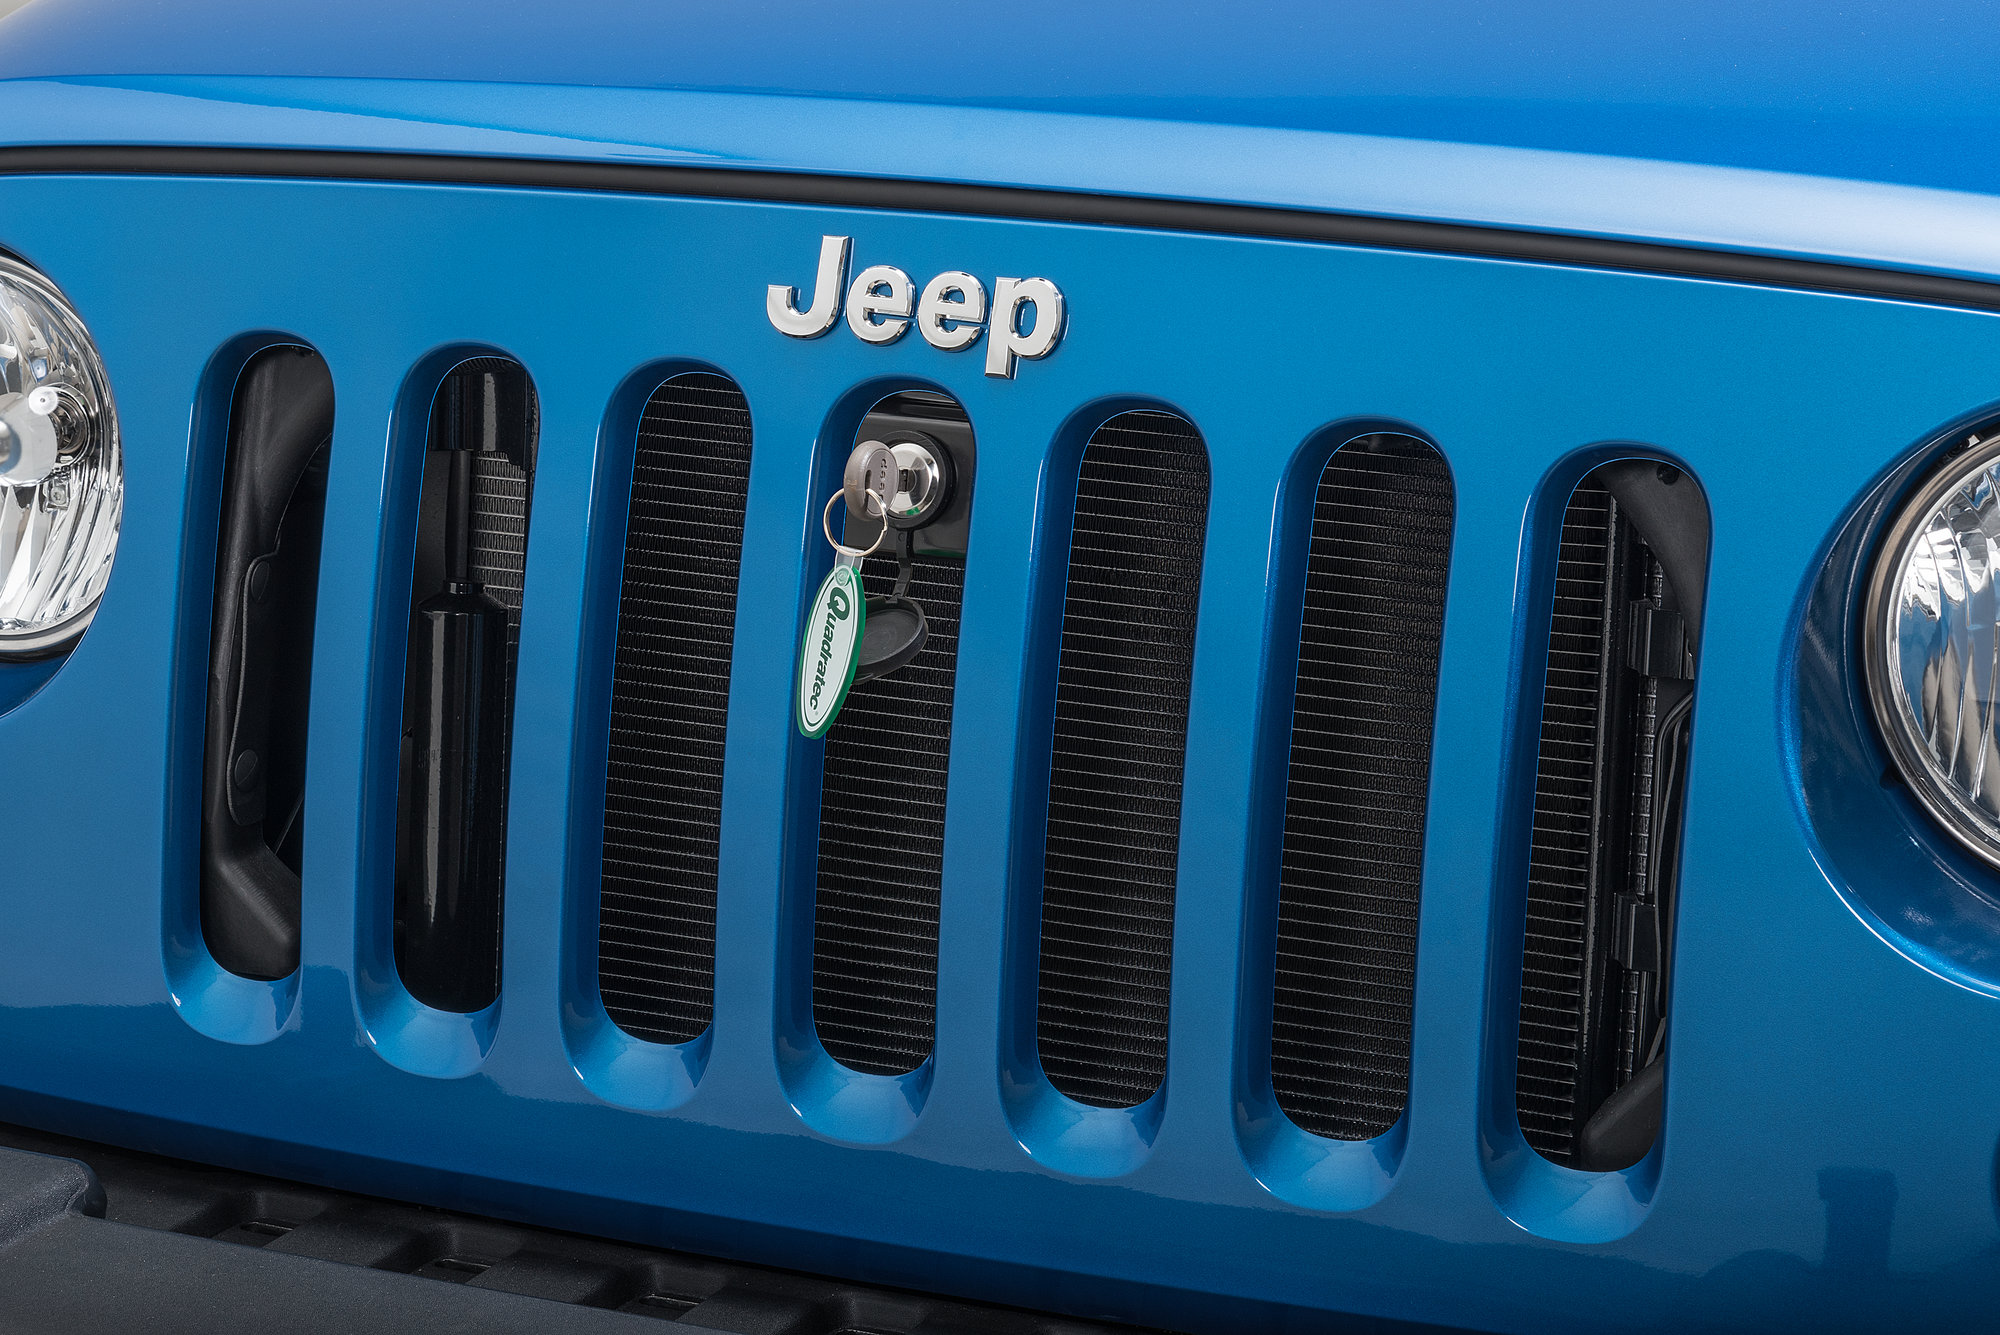 What are Jeep Hood Locks And Latches? | Quadratec